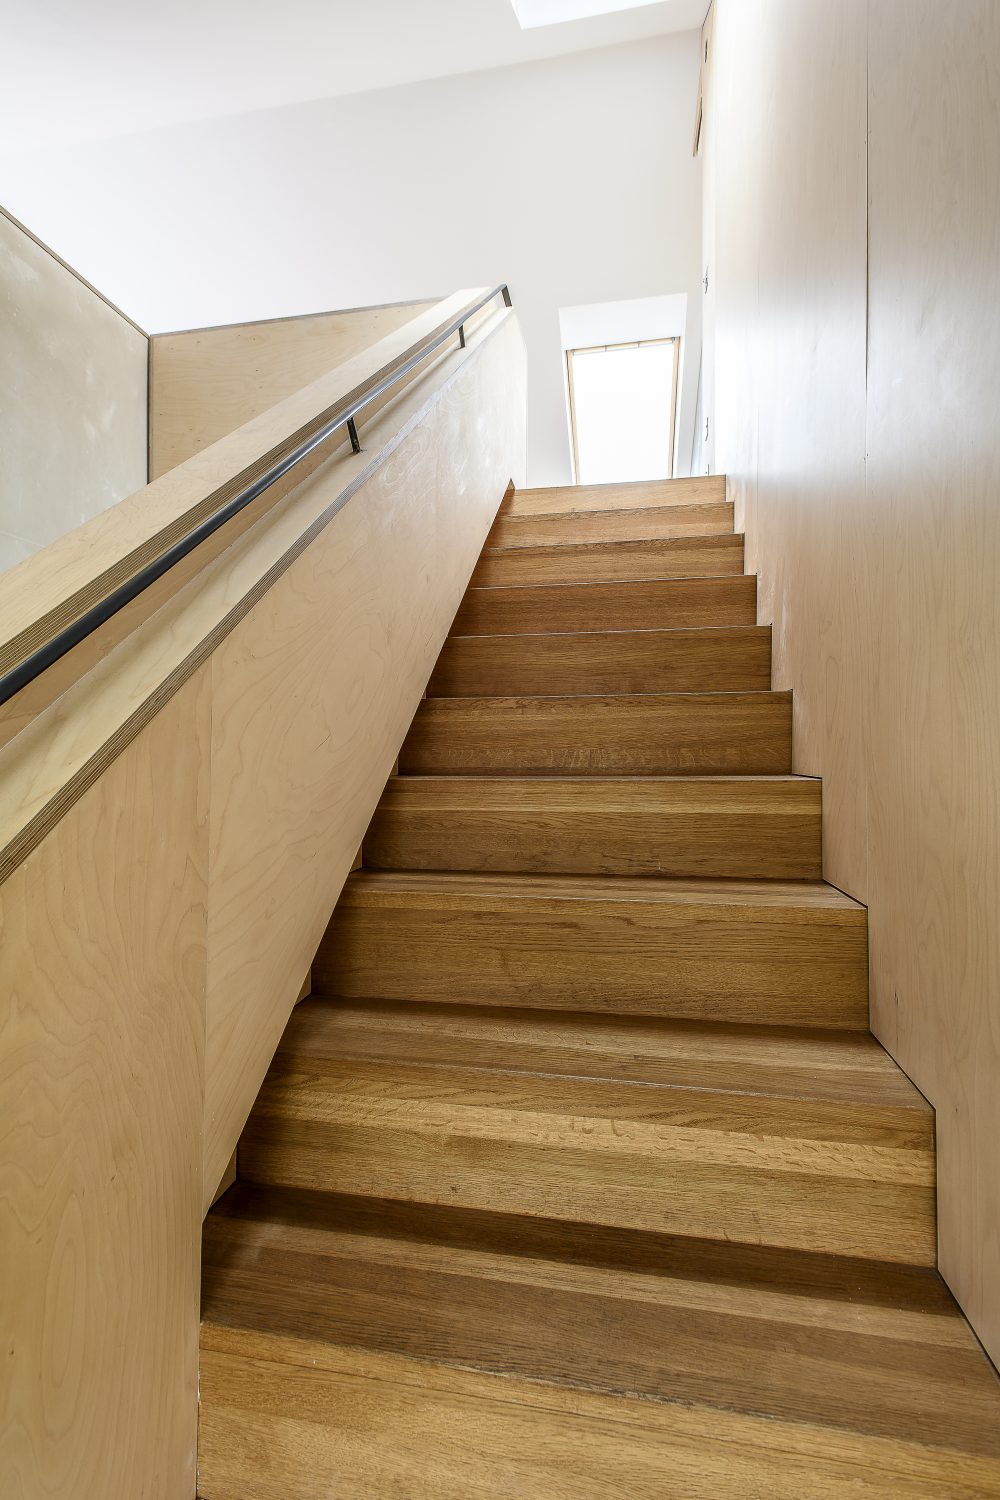 Oak stairs, made from the old oak worktops